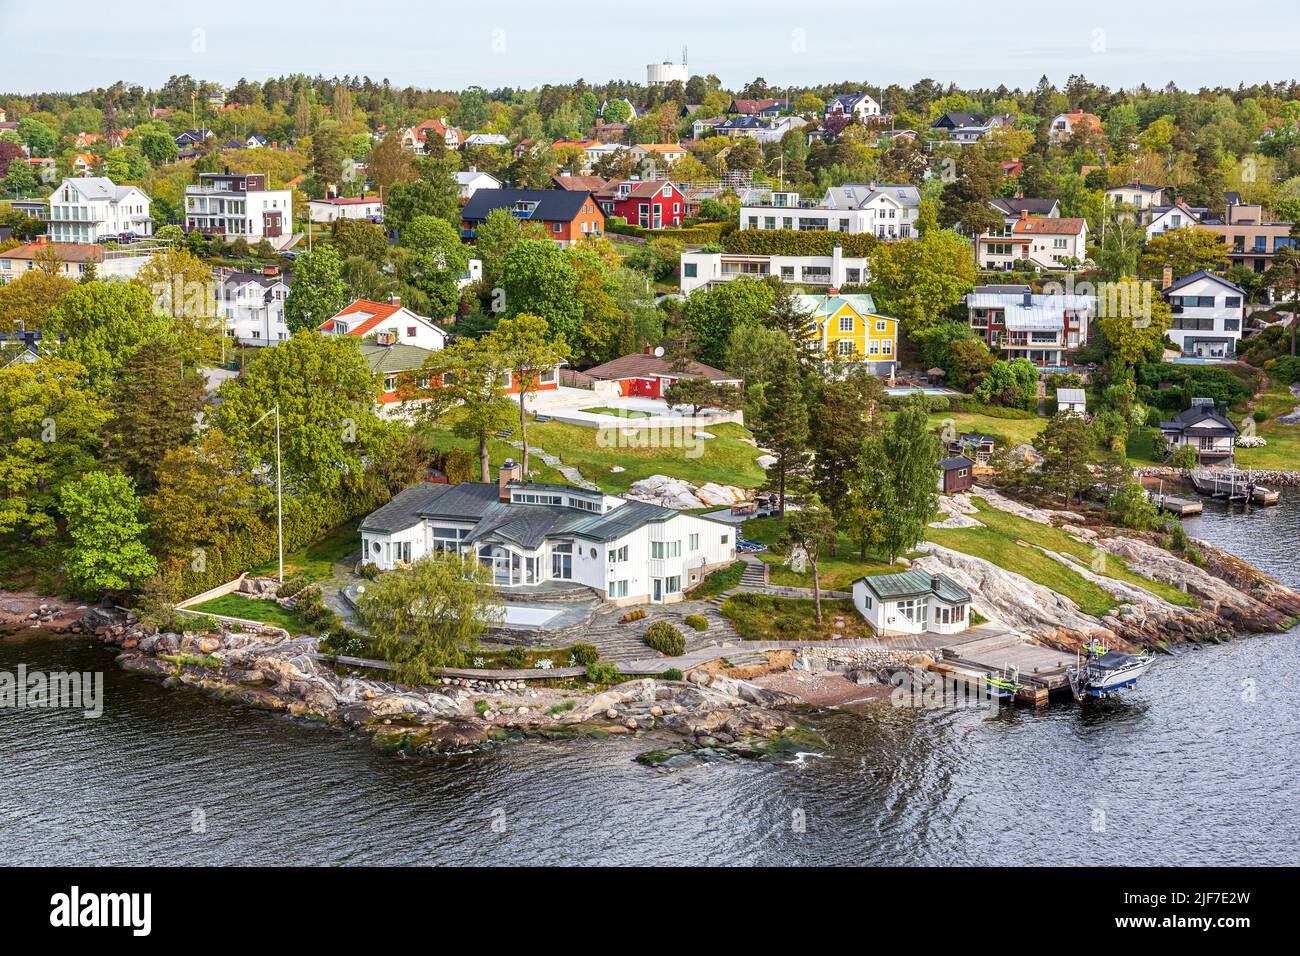 Waterside properties on one of the many islands of the Stockholm Archipelago - here Gashaga on the island of Lidingo, Sweden. Stock Photo